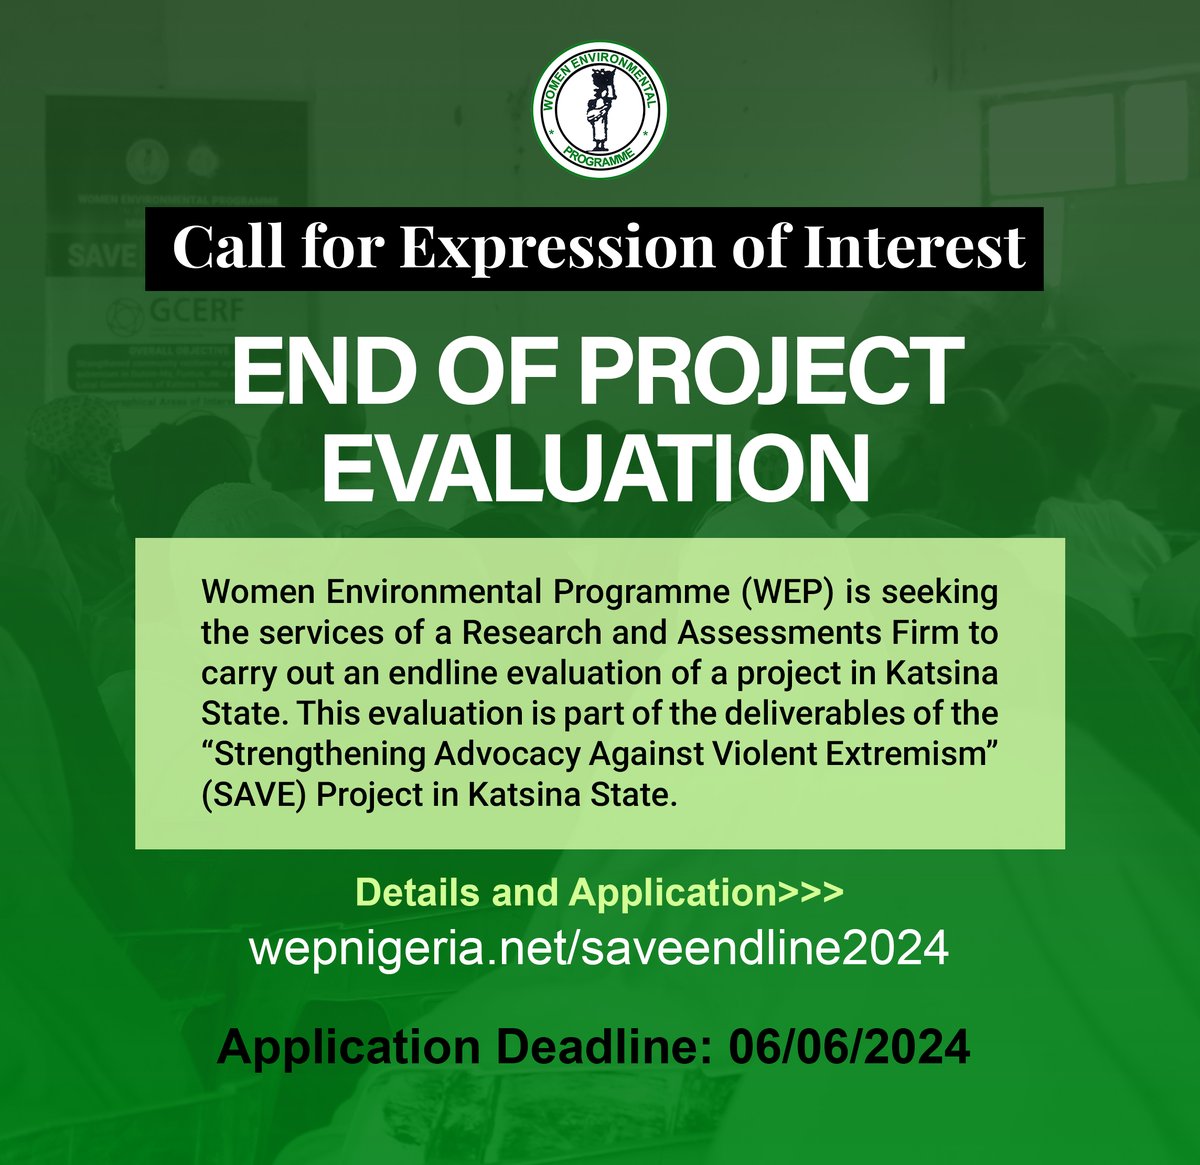 📢🔍Women Environmental Programme (WEP) is seeking the services of a Research and Assessments Firm to carry out an endline evaluation of a project in Katsina State. Check the link on our website for more details and application>> 🔗wepnigeria.net/saveendline2024